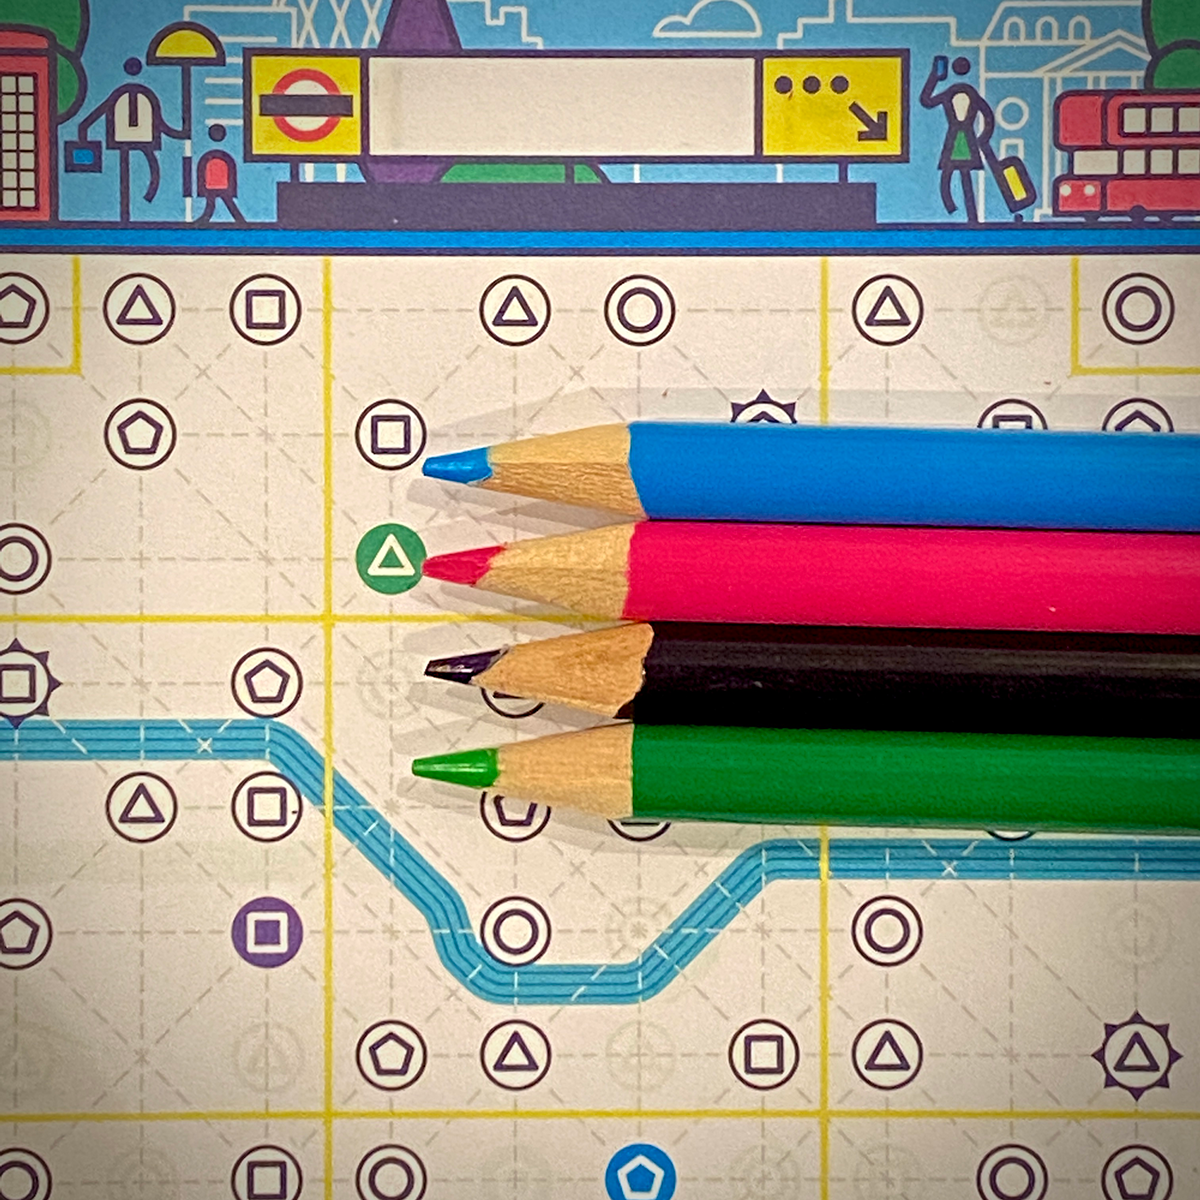 Buy Next Station London from Out of Town Games